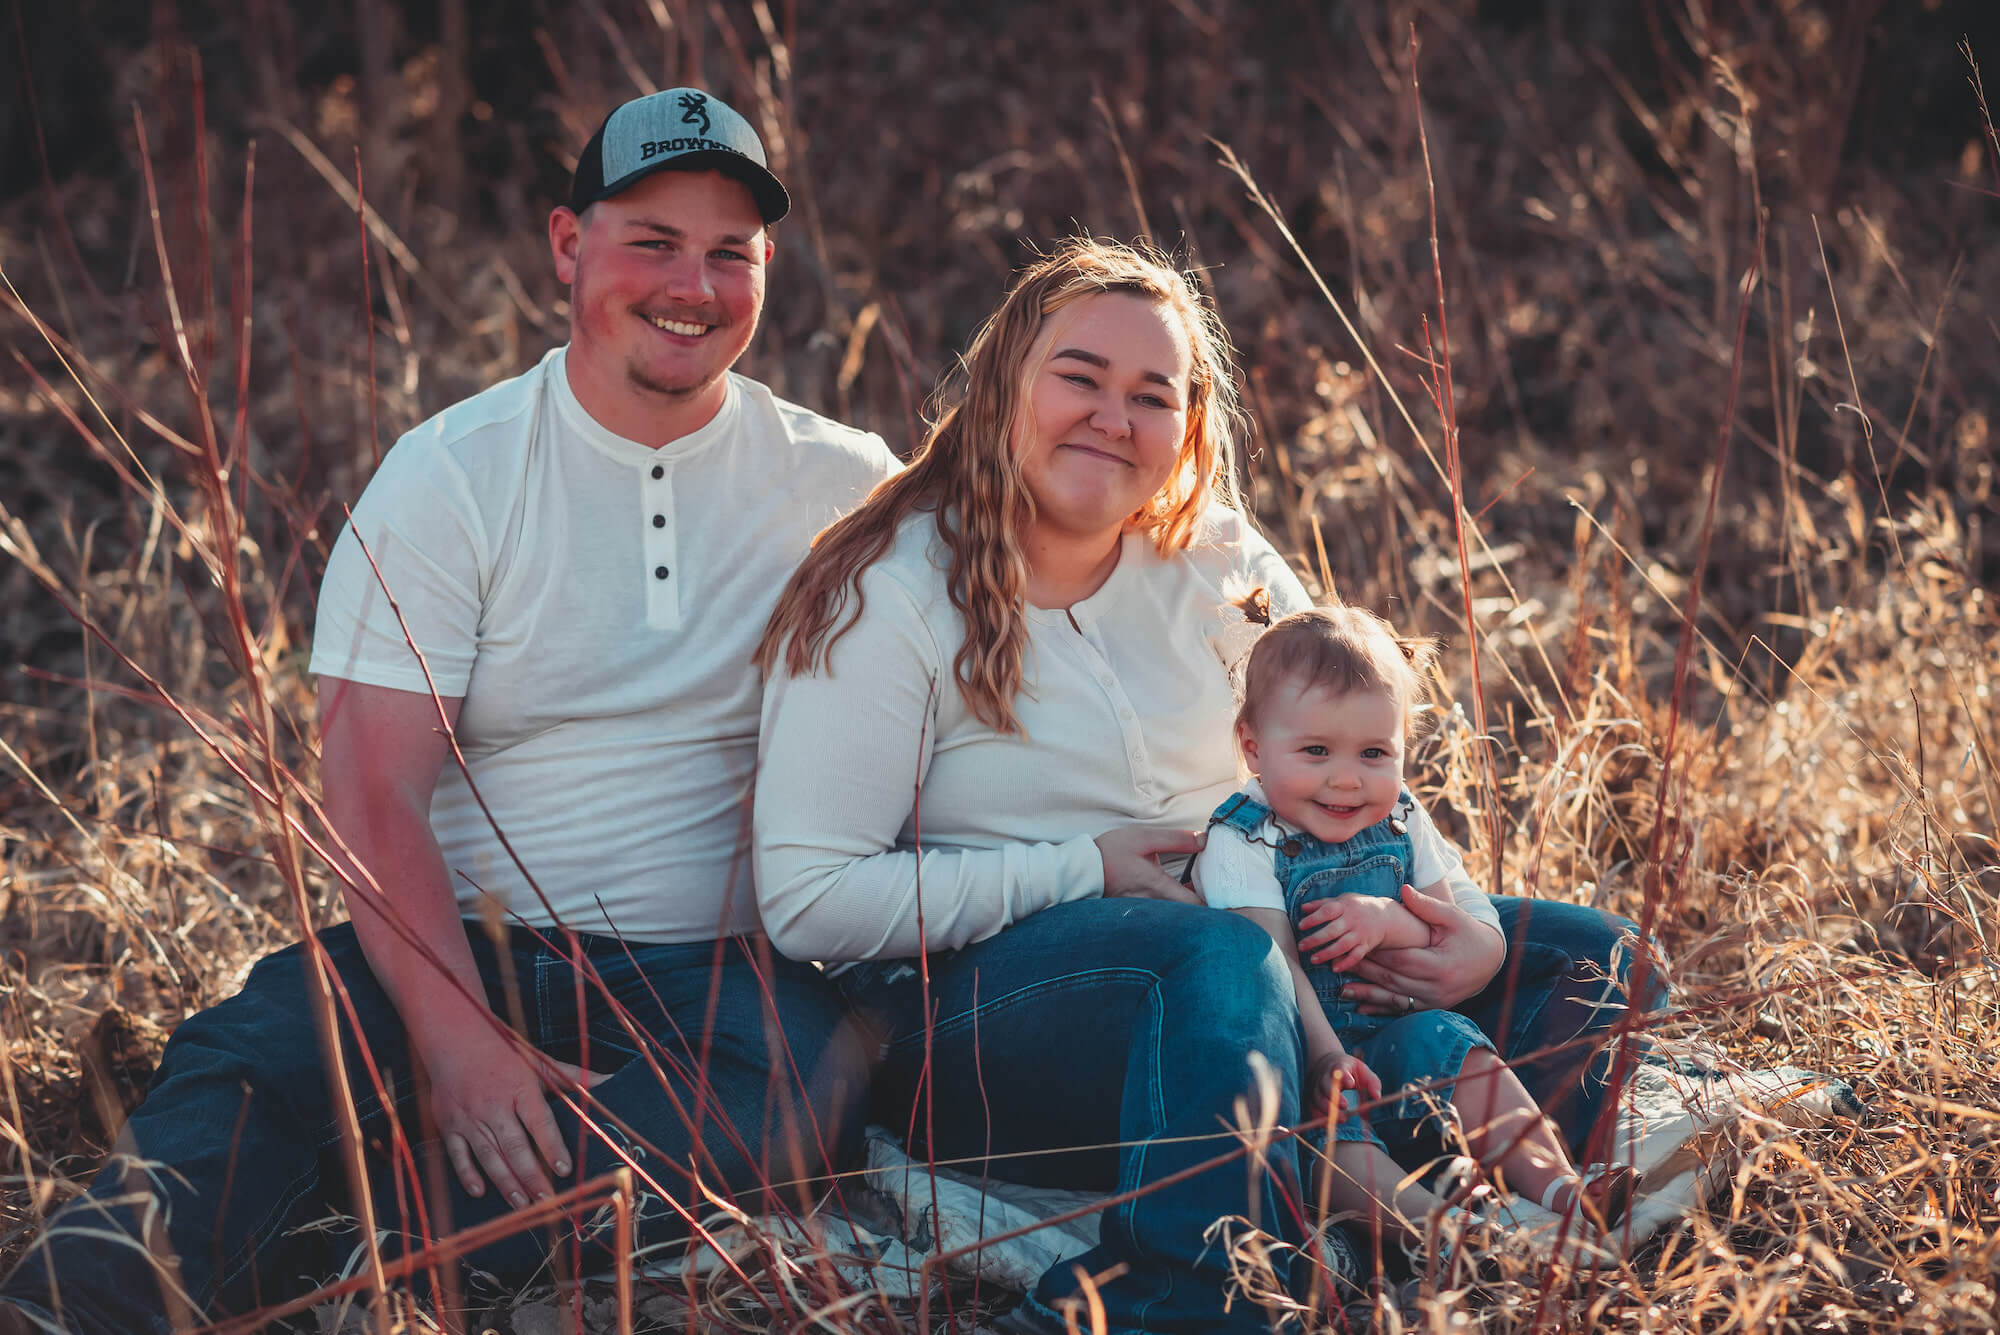 des moines family portraits, family photography near me, professional family photos